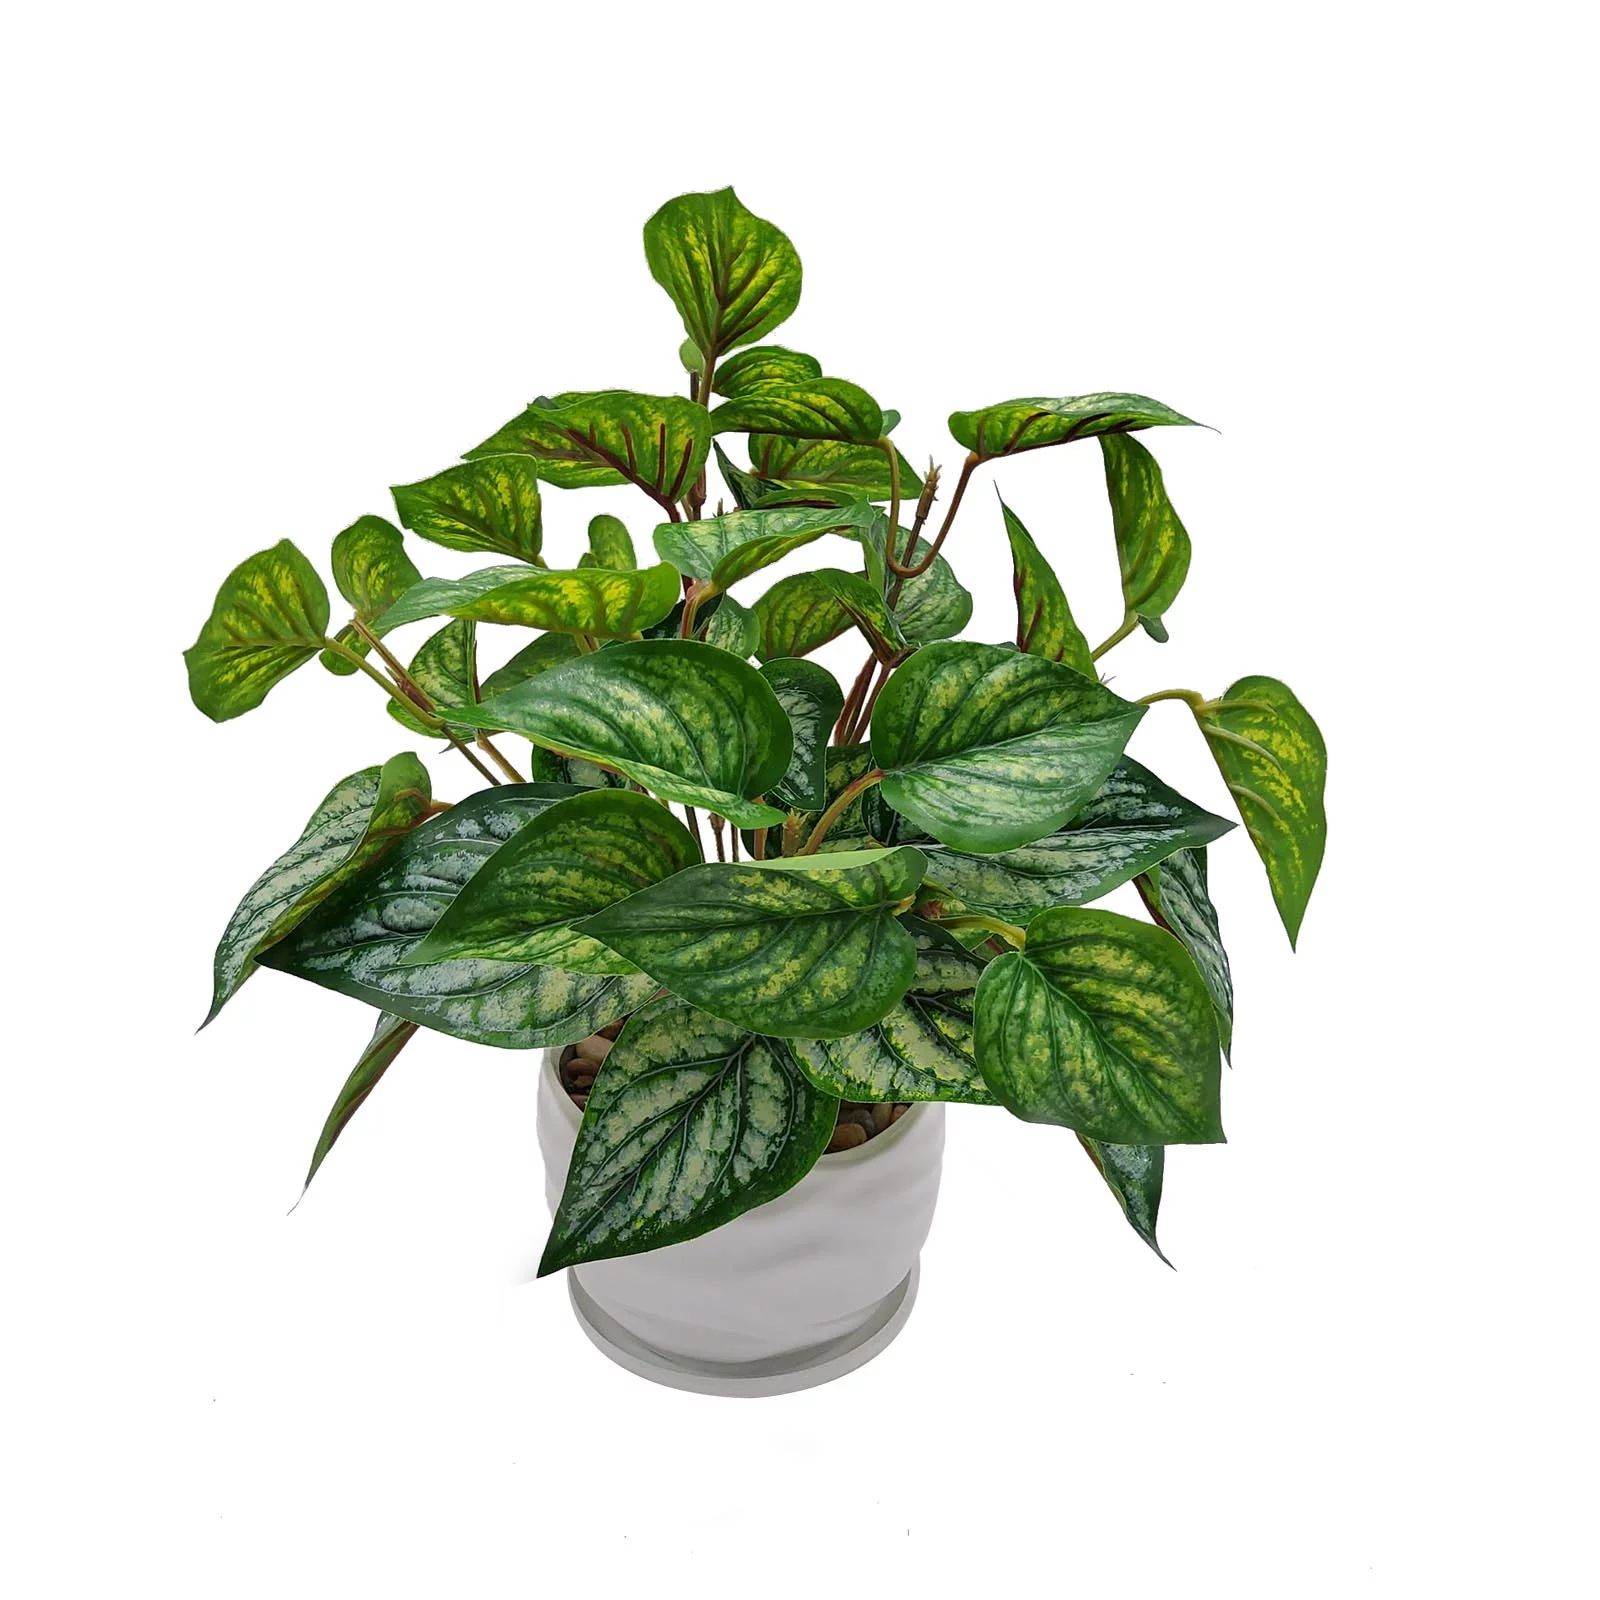 12.5" Height Mainstays Artificial Plant in Pot, Satin Pothos, Green Color | Walmart (US)